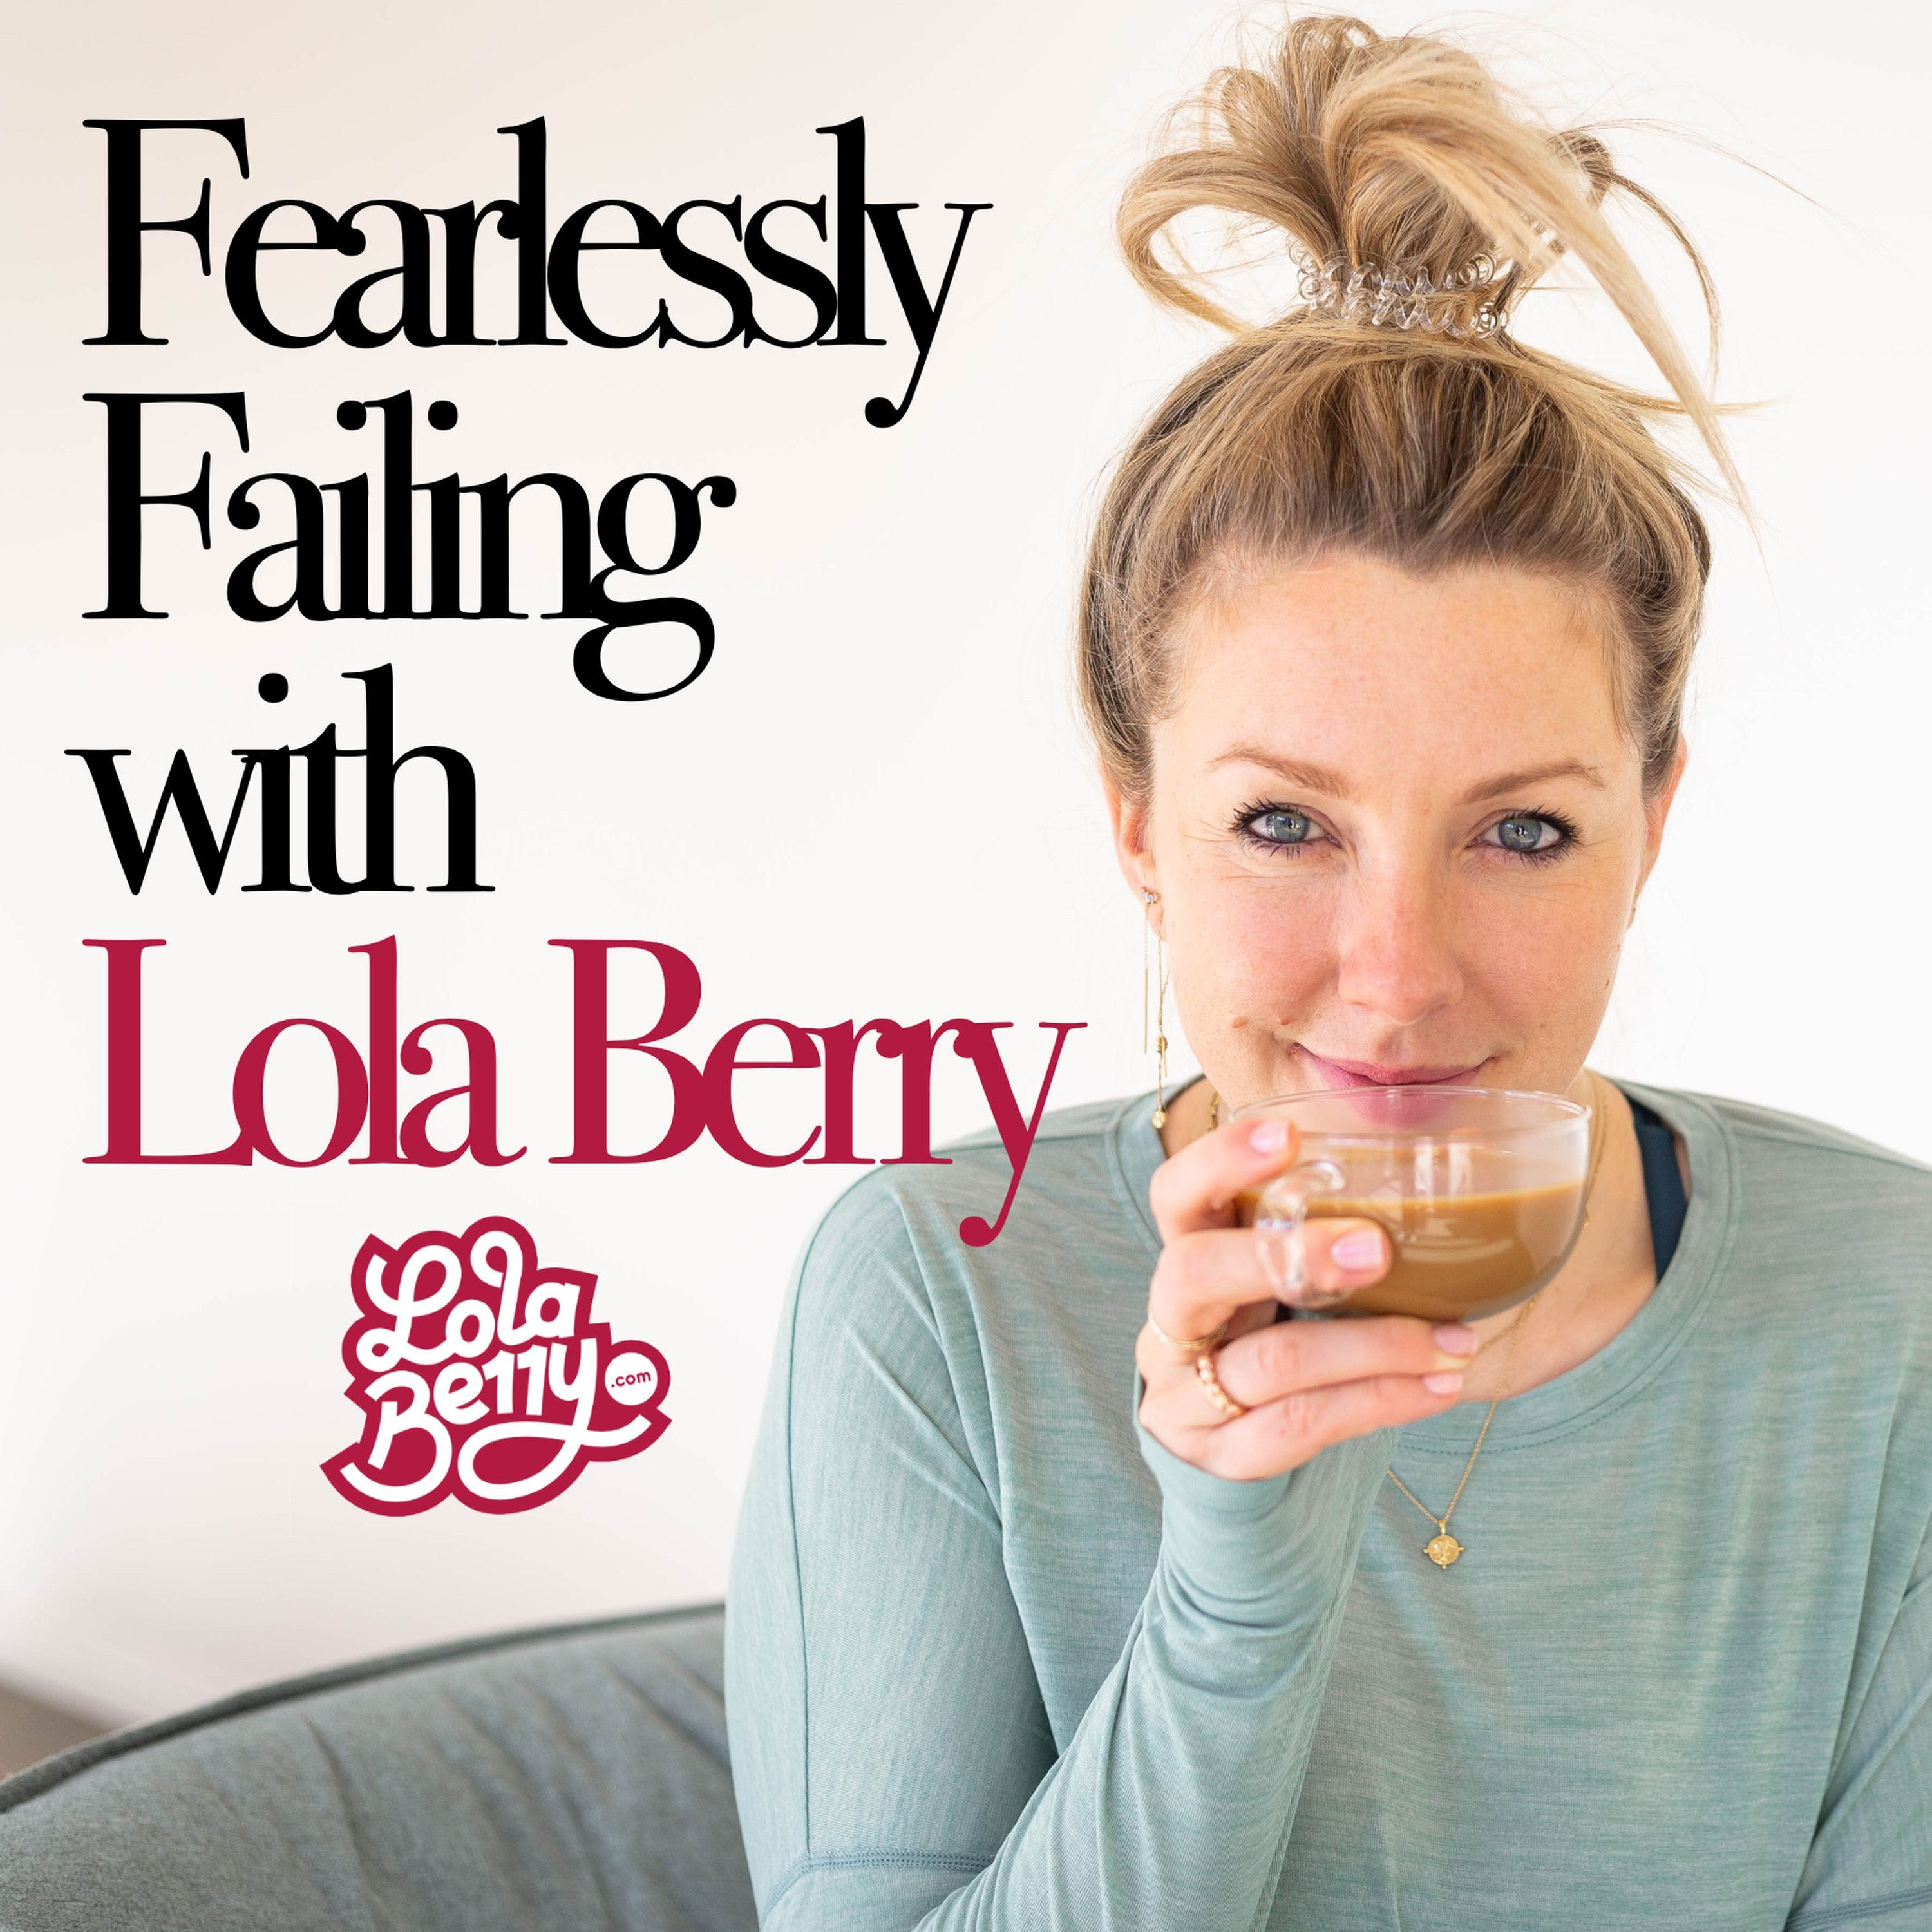 13. Fearlessly Failing: Stacey June